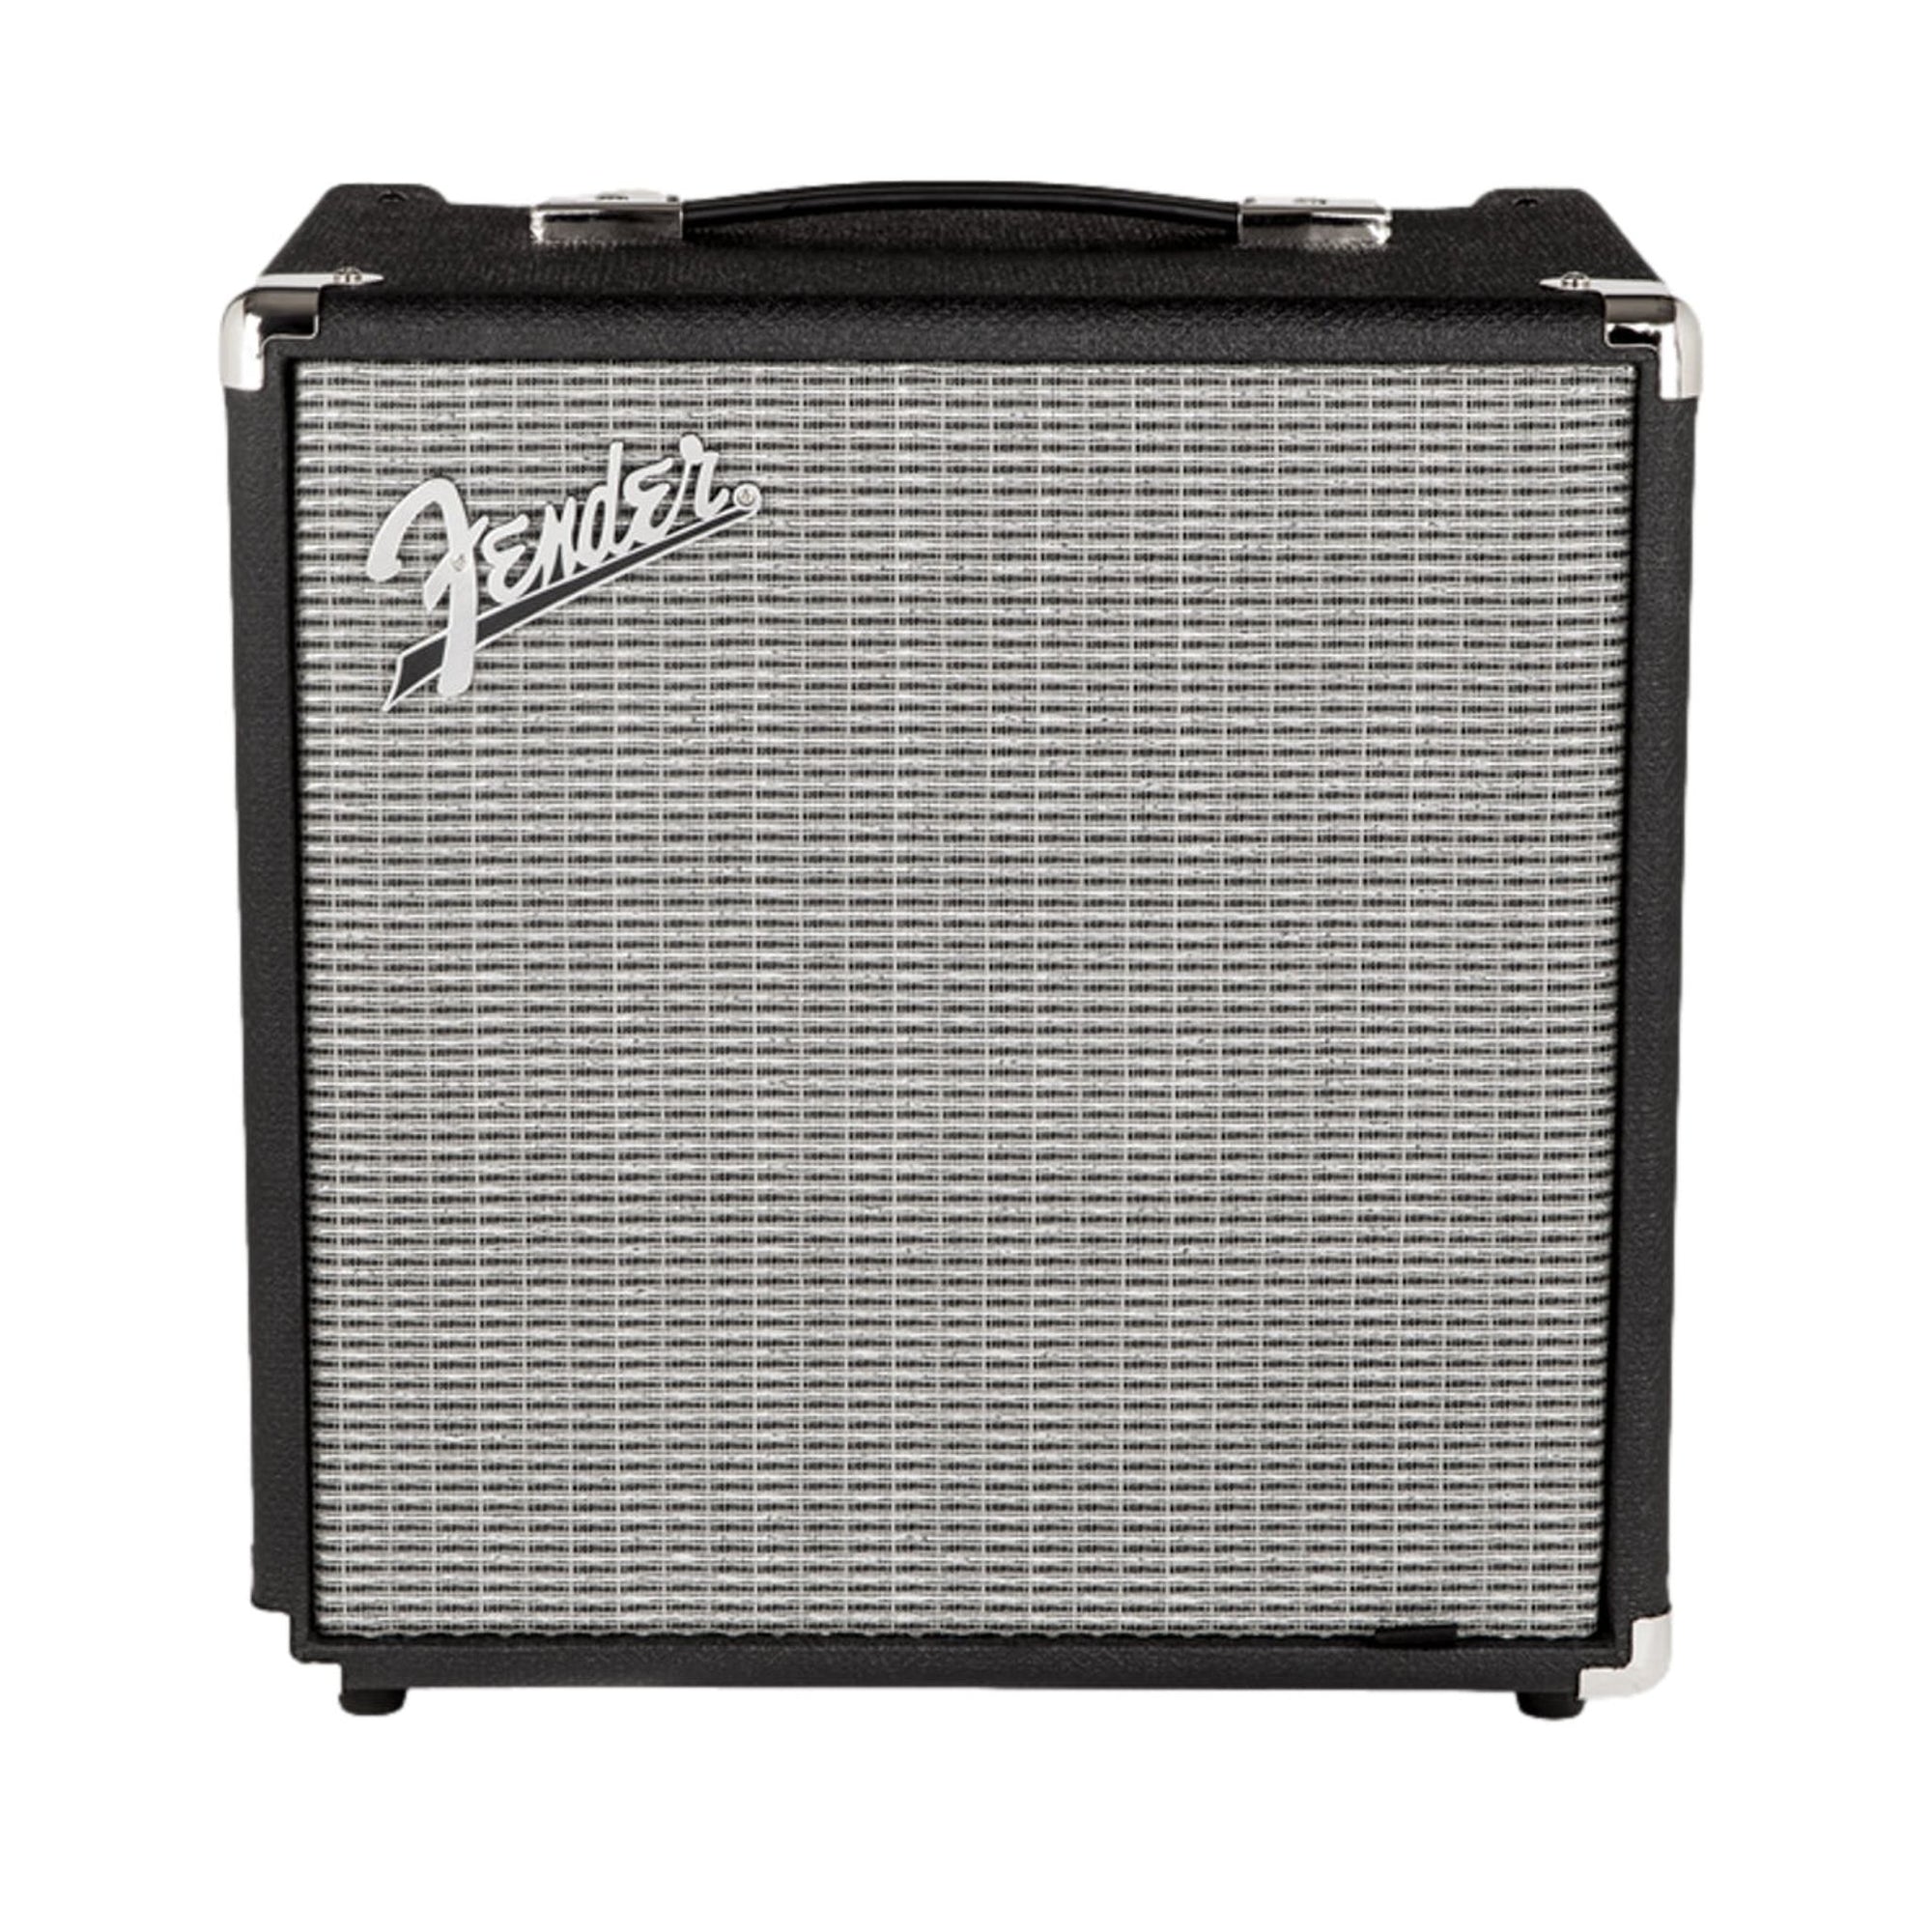 The Fender Rumble 25is for bassists everywhere at all levels. The Rumbles are astoundingly compact, portable and lightweight. A perfect combo for at-home and coffeehouse-gigs for any bassist.